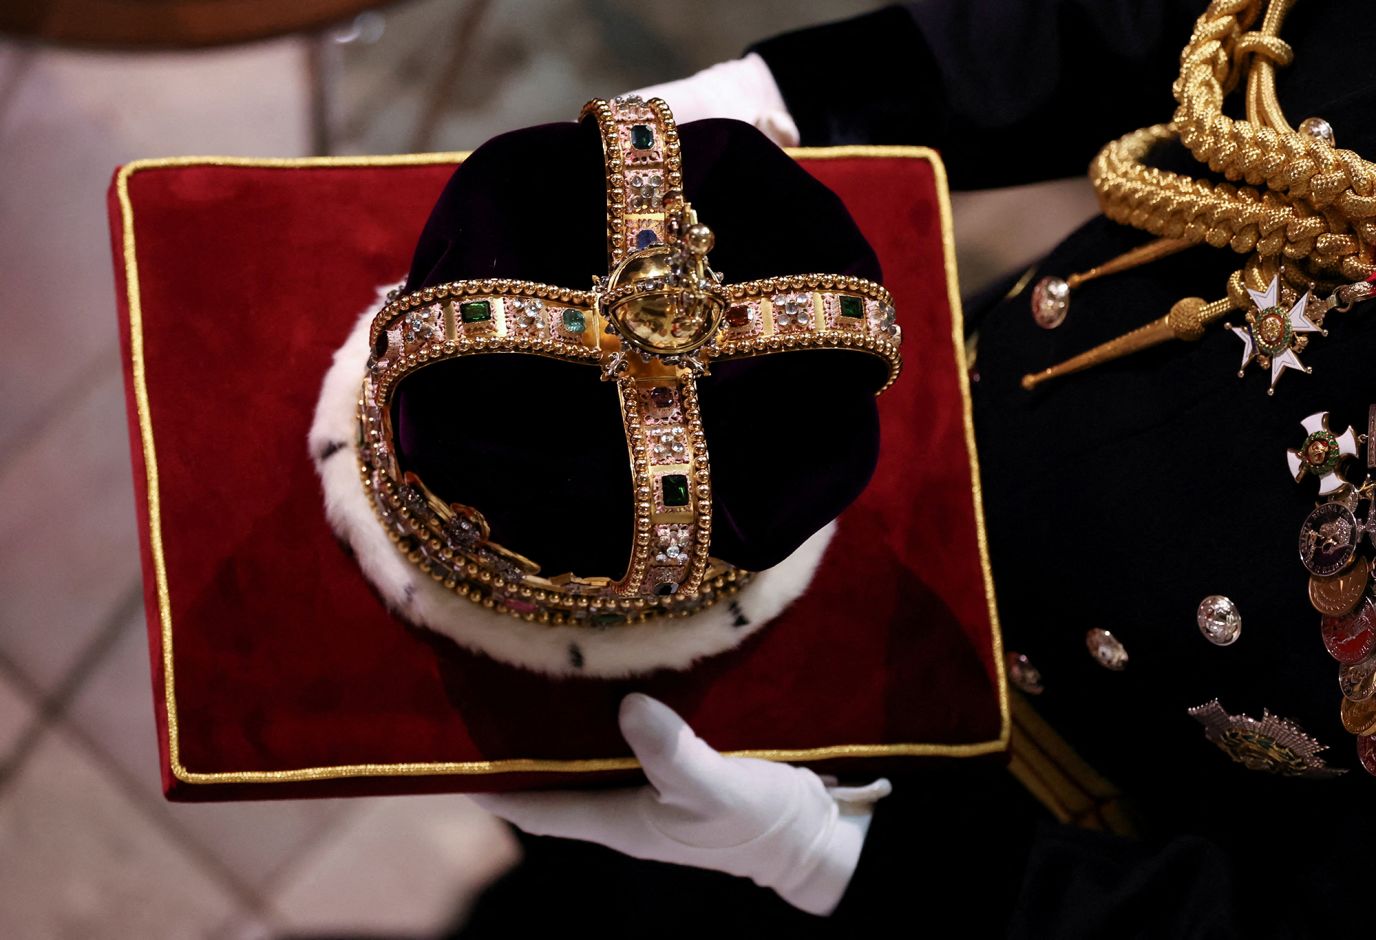 St Edward's Crown, which will be used to crown the King during the coronation, is carried inside Westminster Abbey.